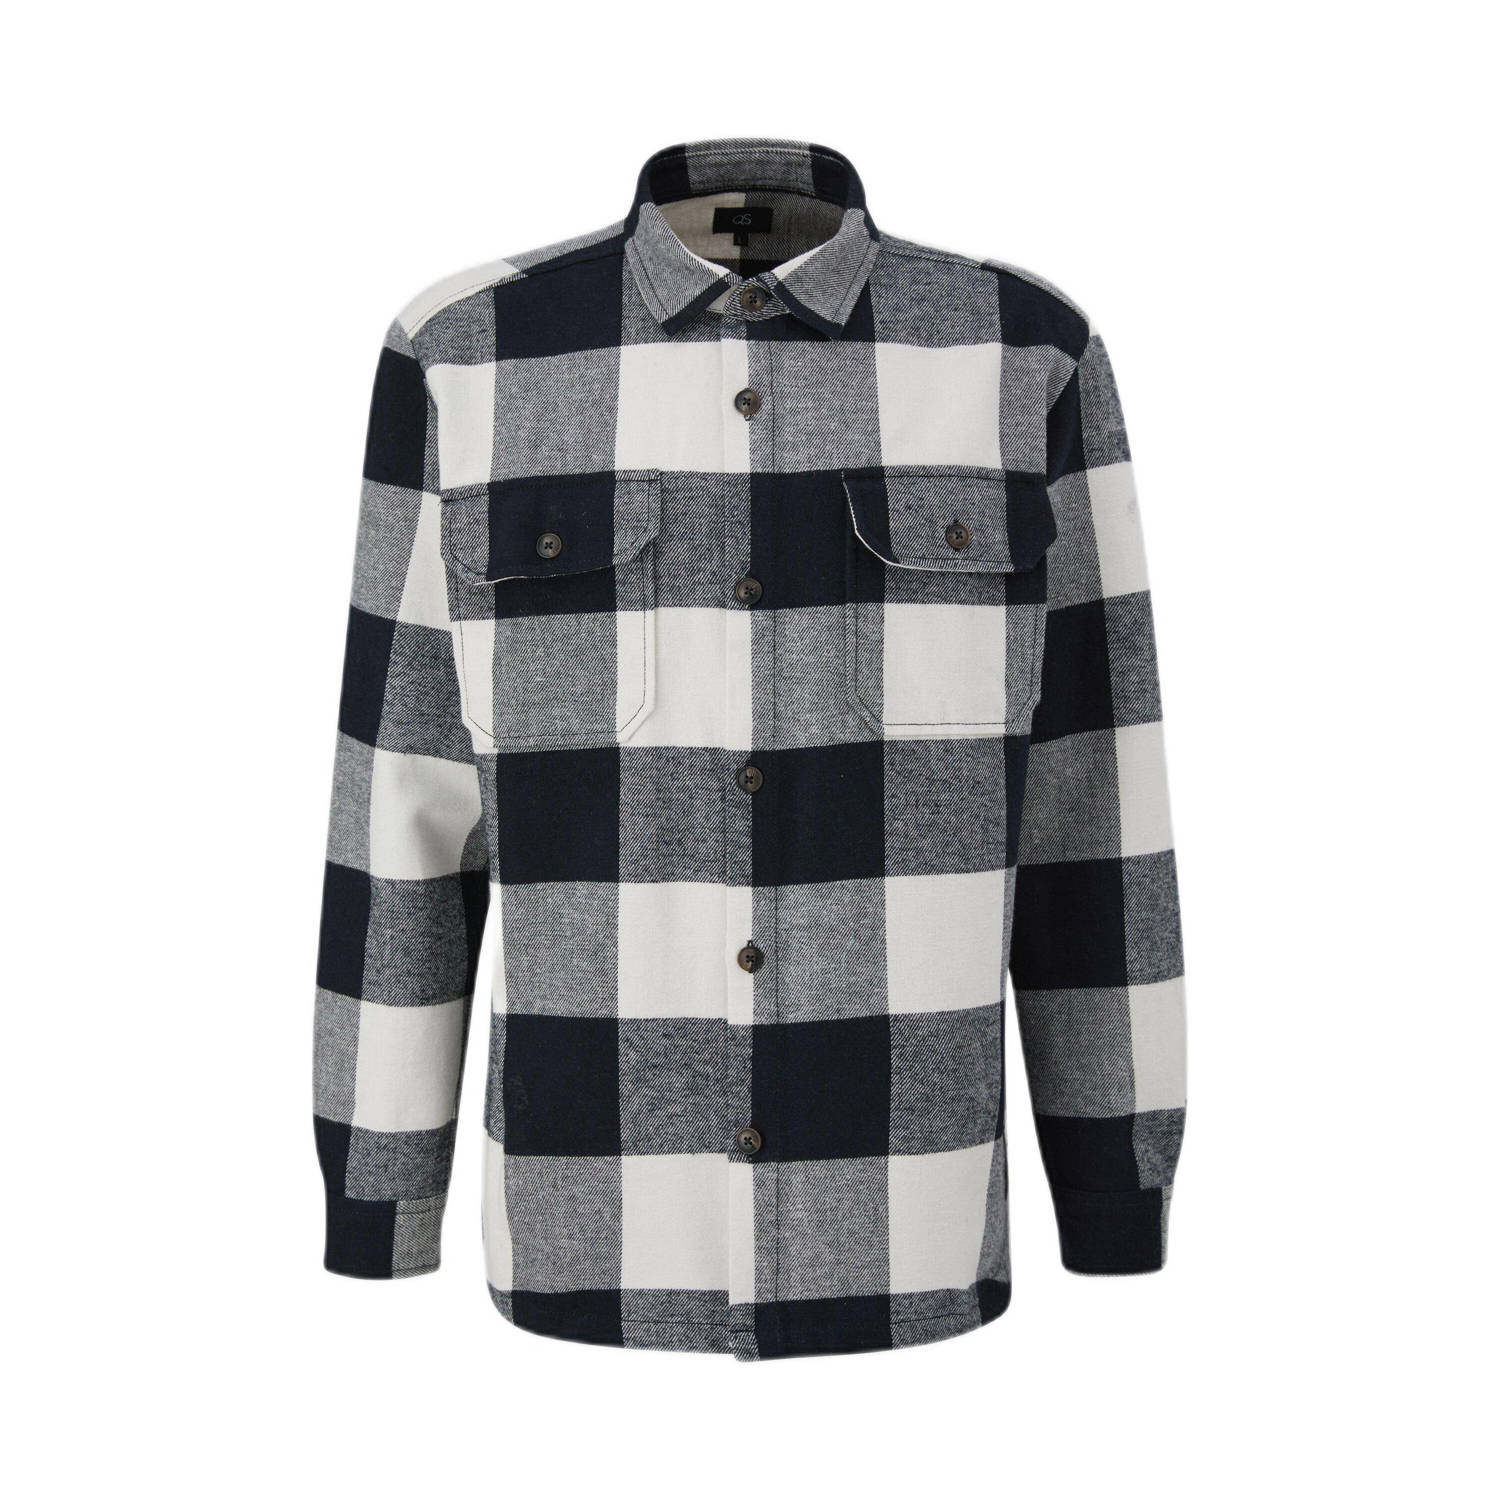 Q S by s.Oliver geruit loose fit overshirt grijs